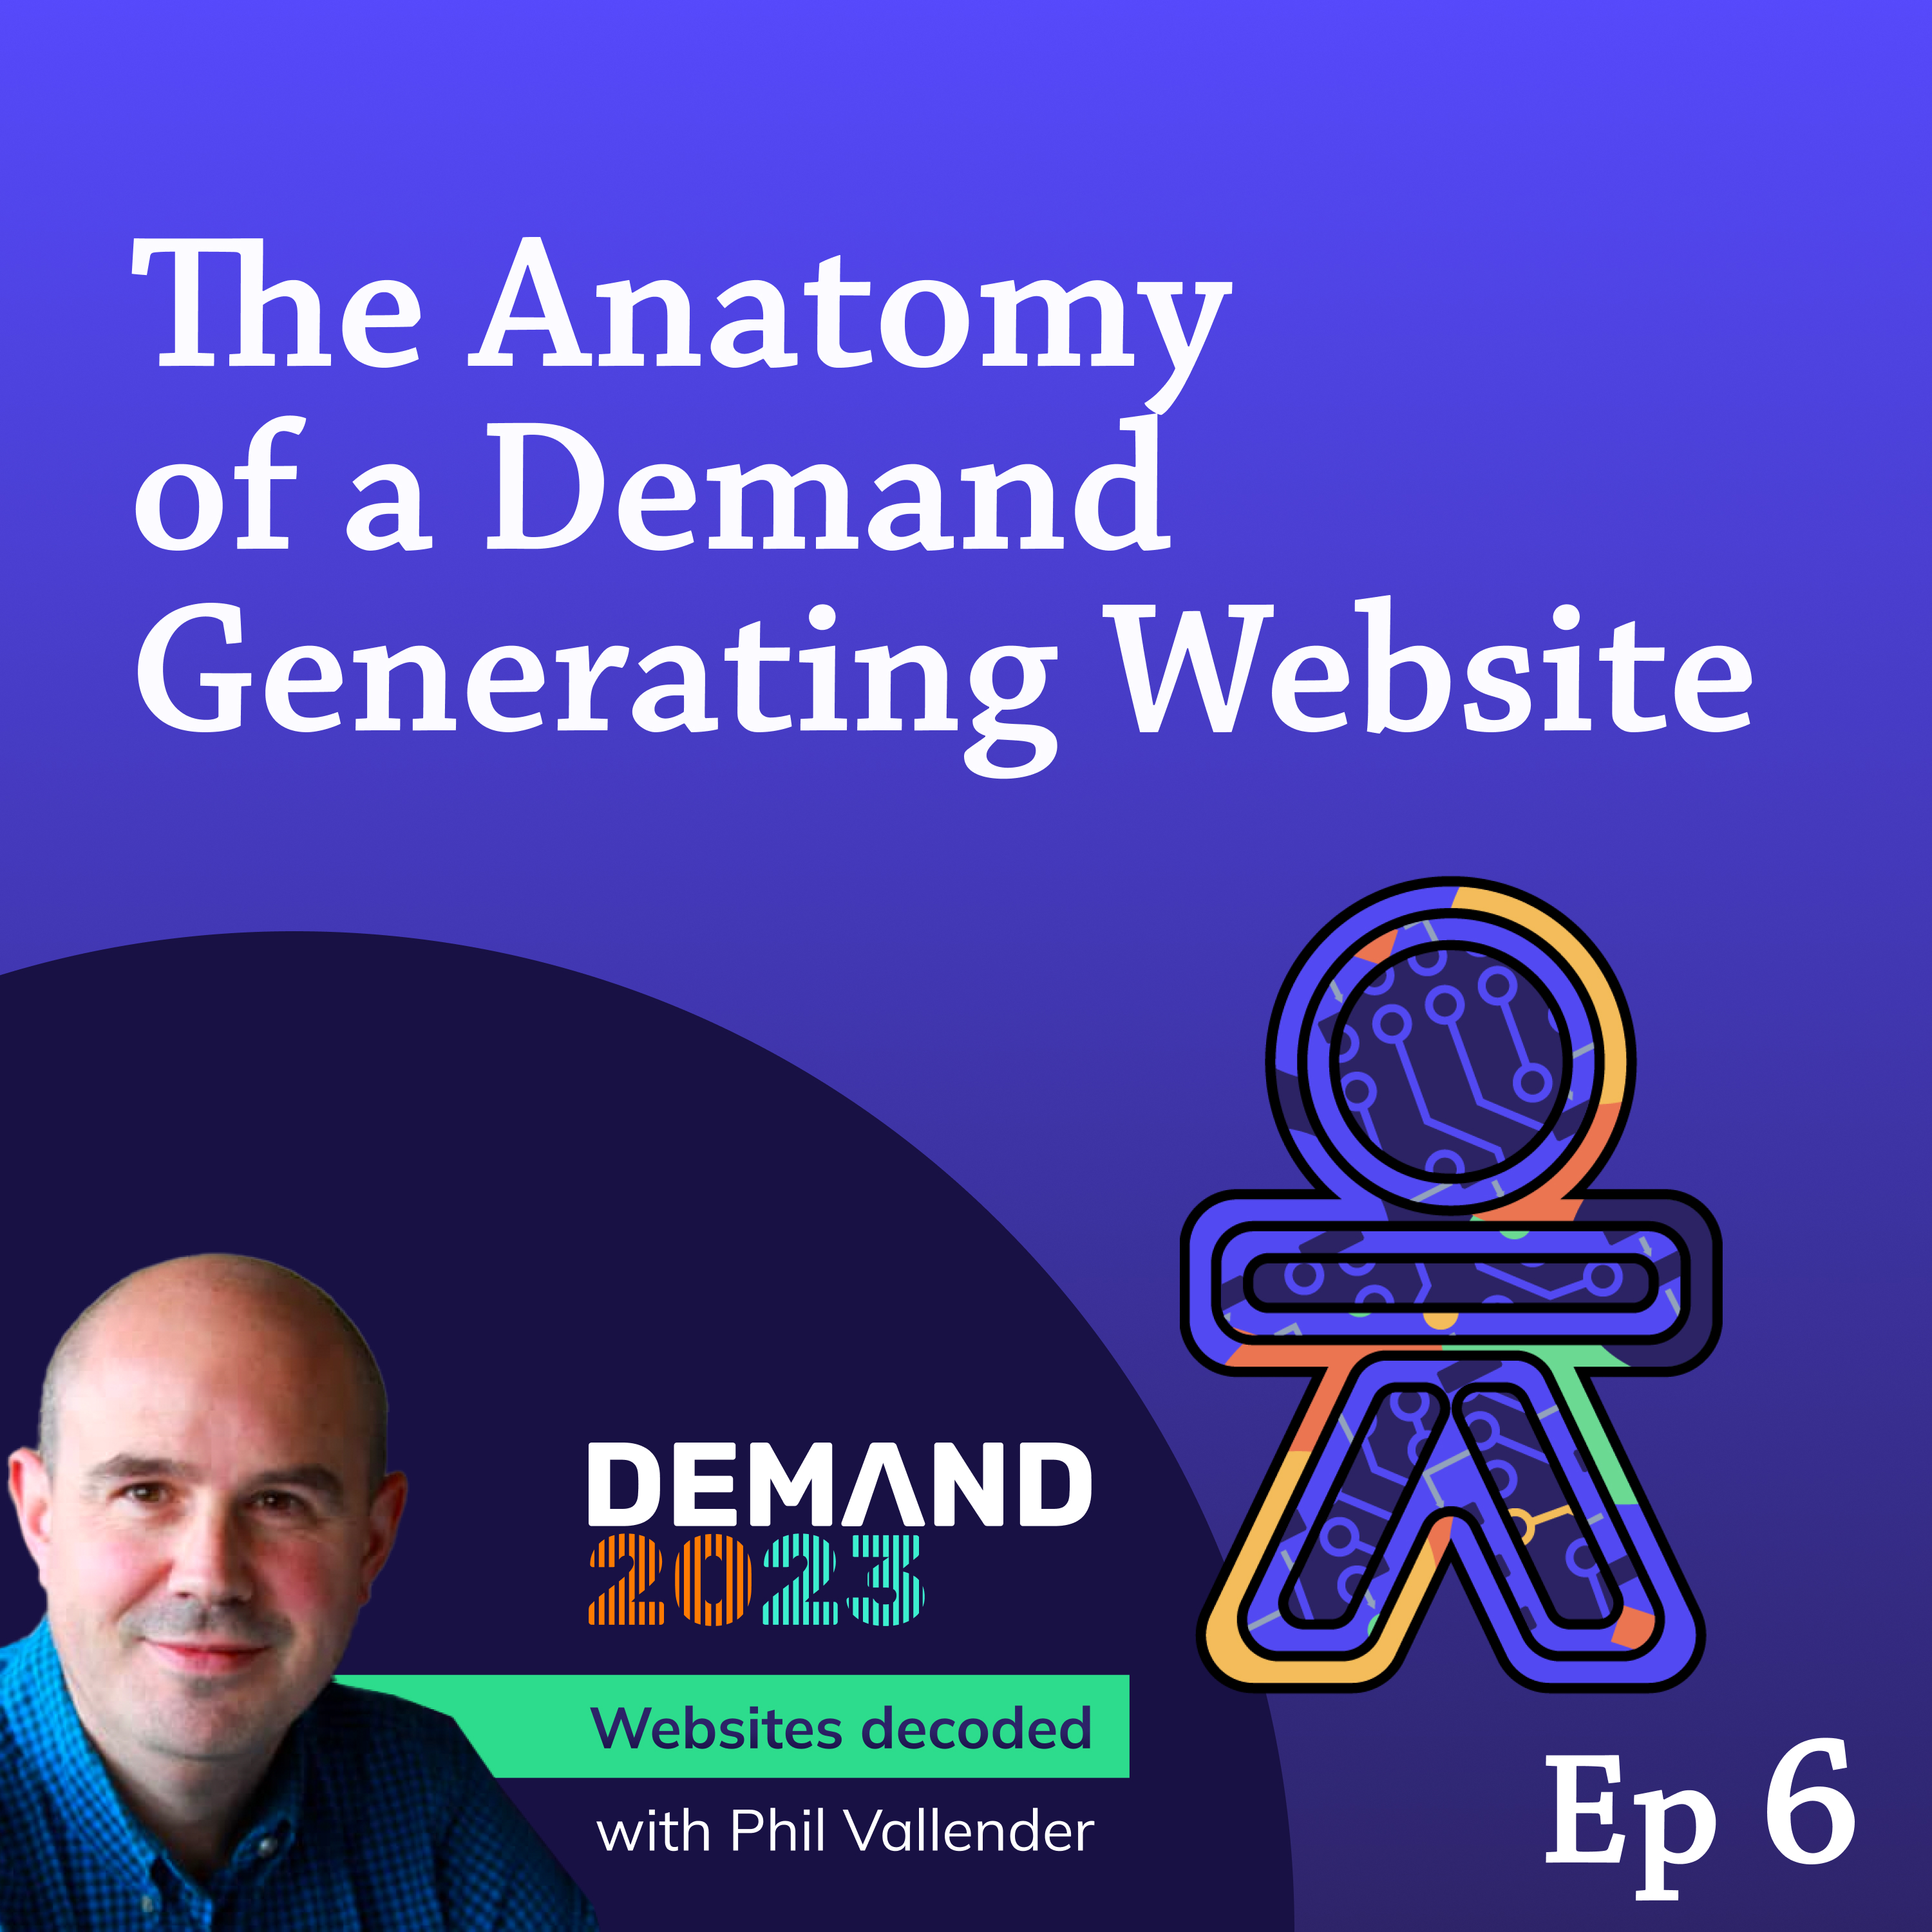 The Anatomy of a Demand Generating Website